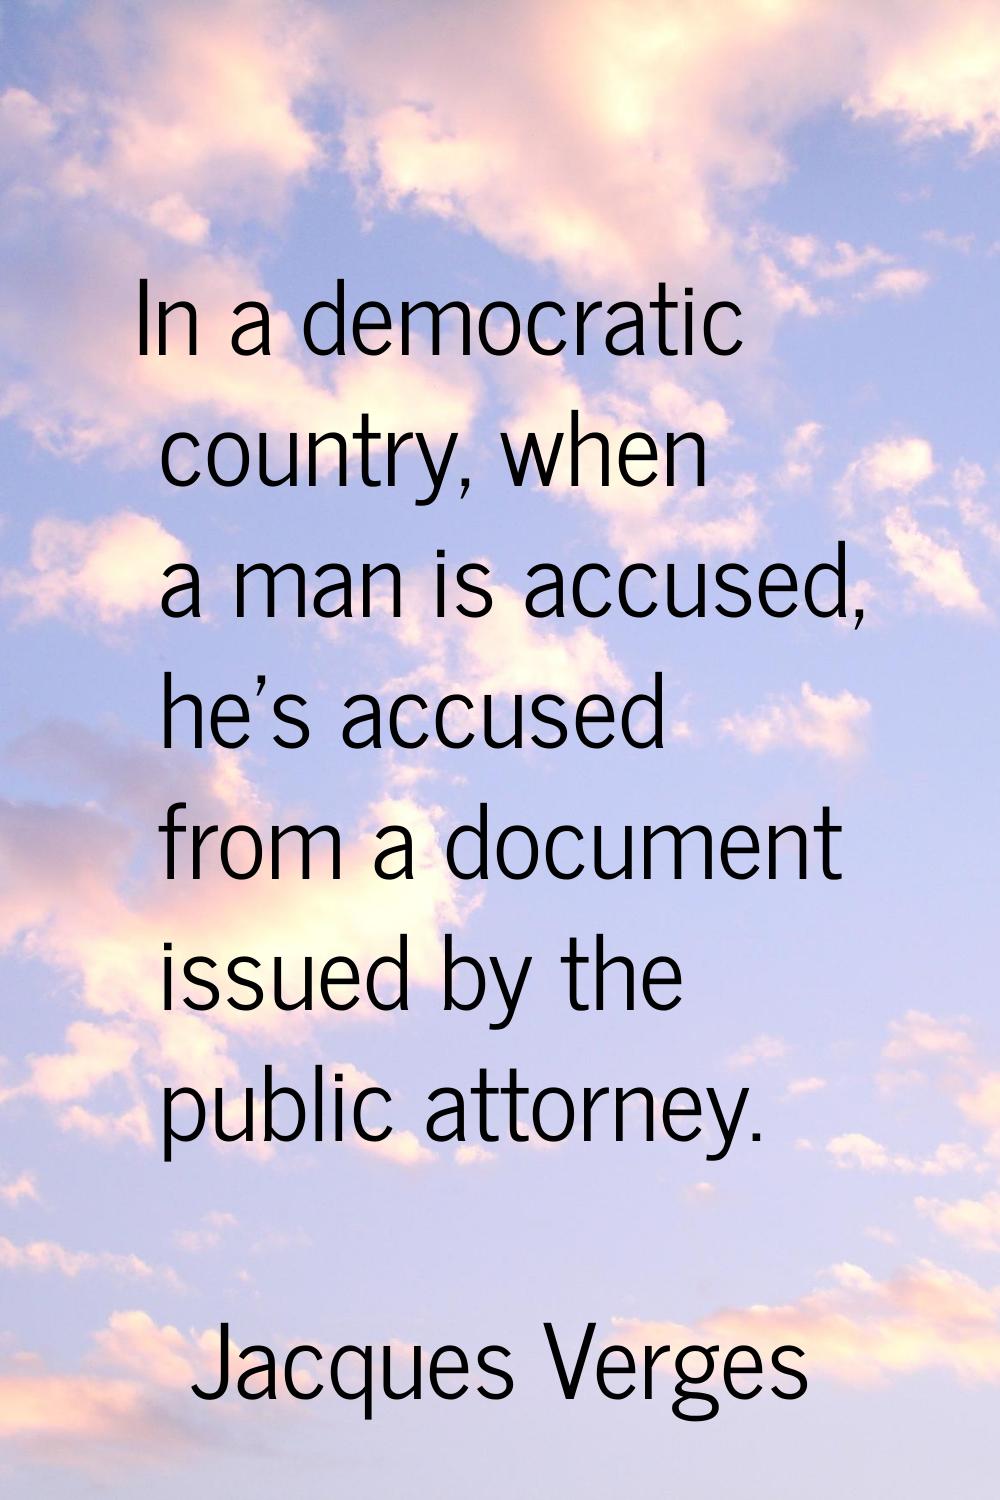 In a democratic country, when a man is accused, he's accused from a document issued by the public a